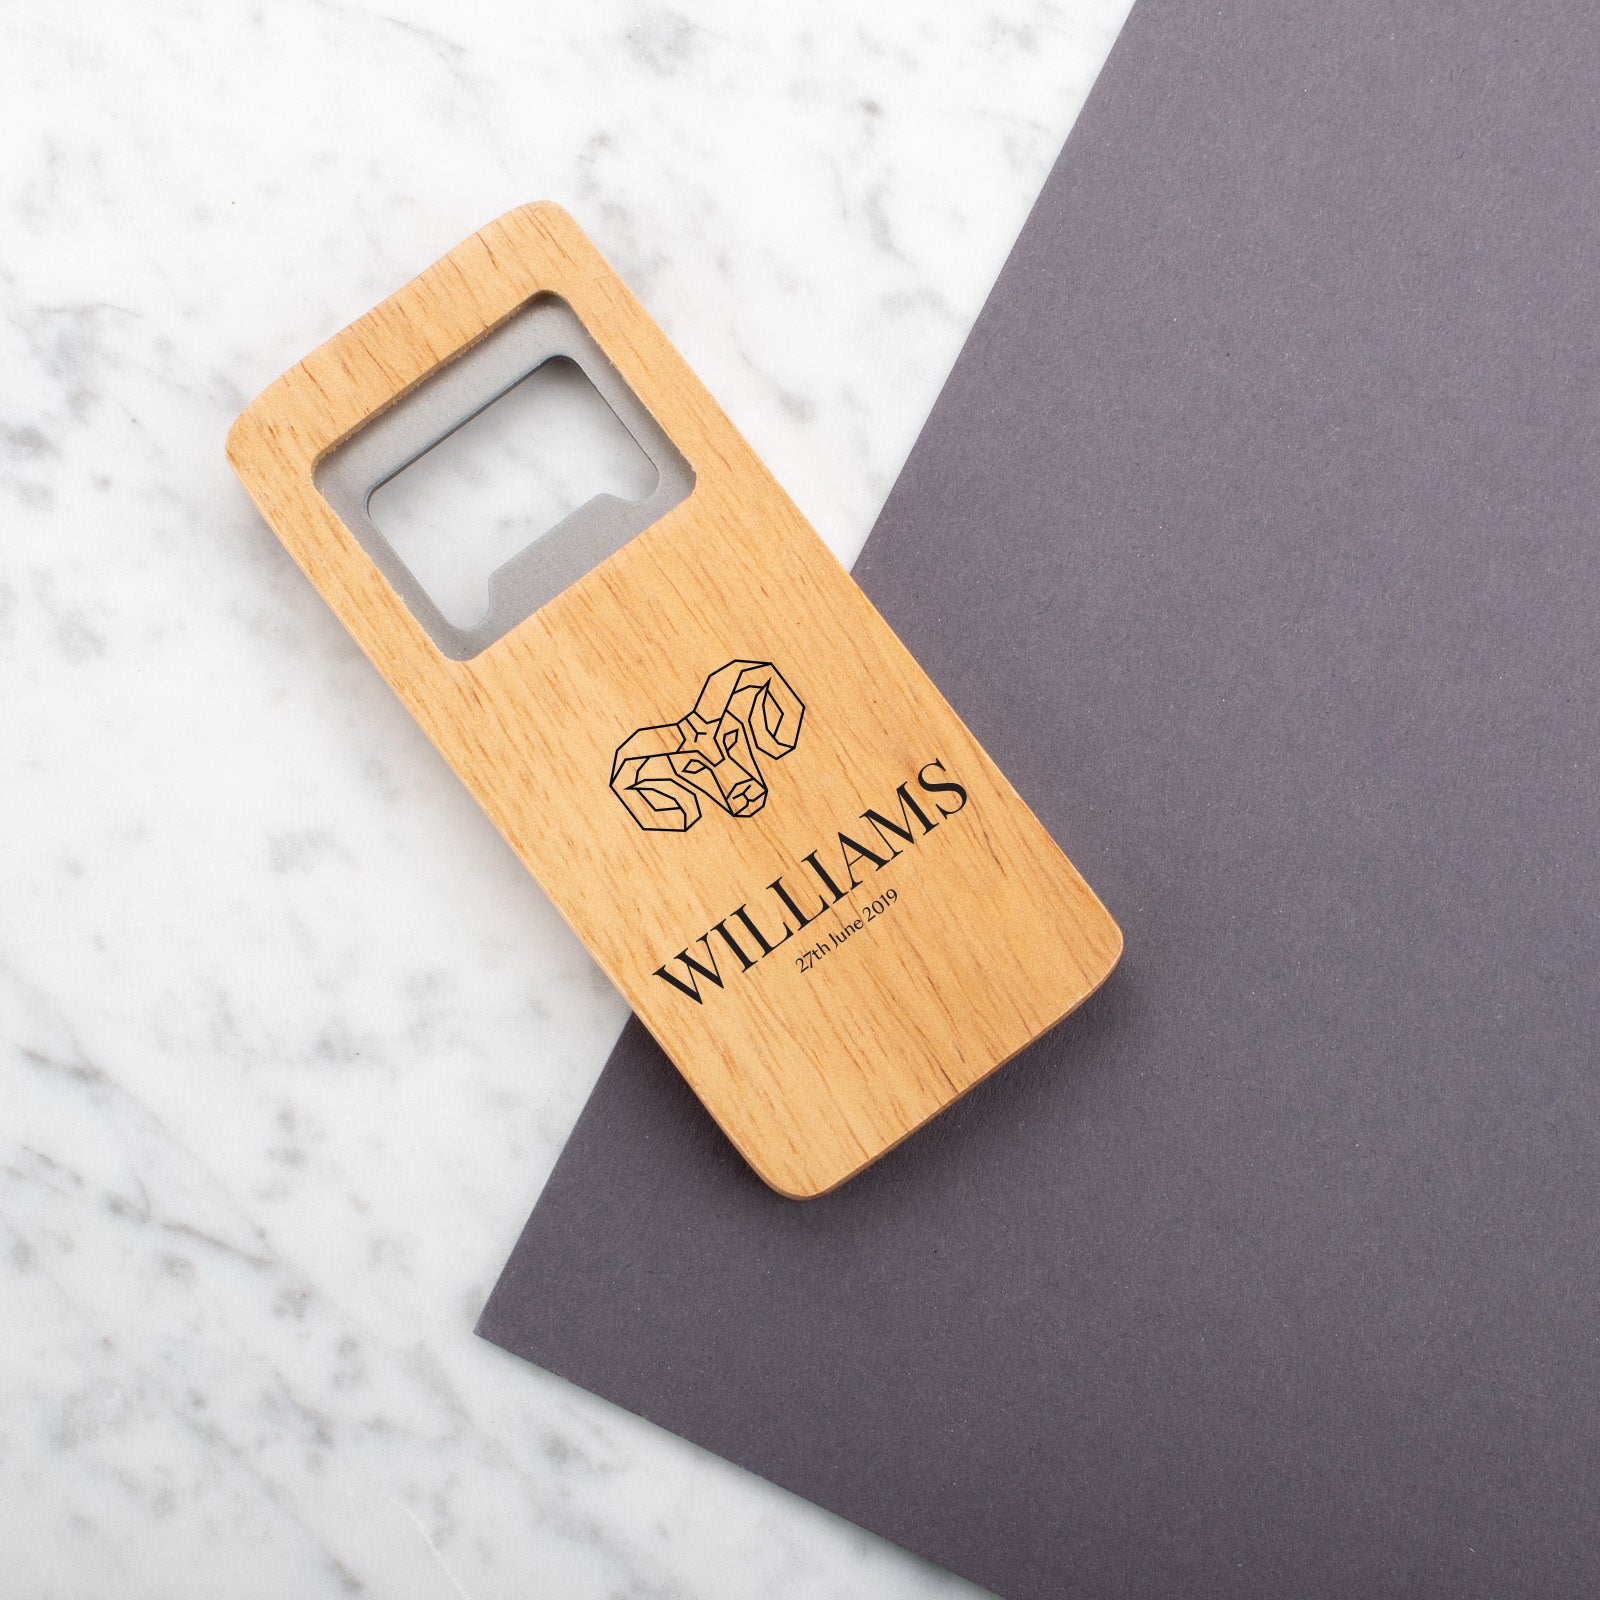 Personalised Engraved Wooden Bottle Opener Rectangle - No Caps!